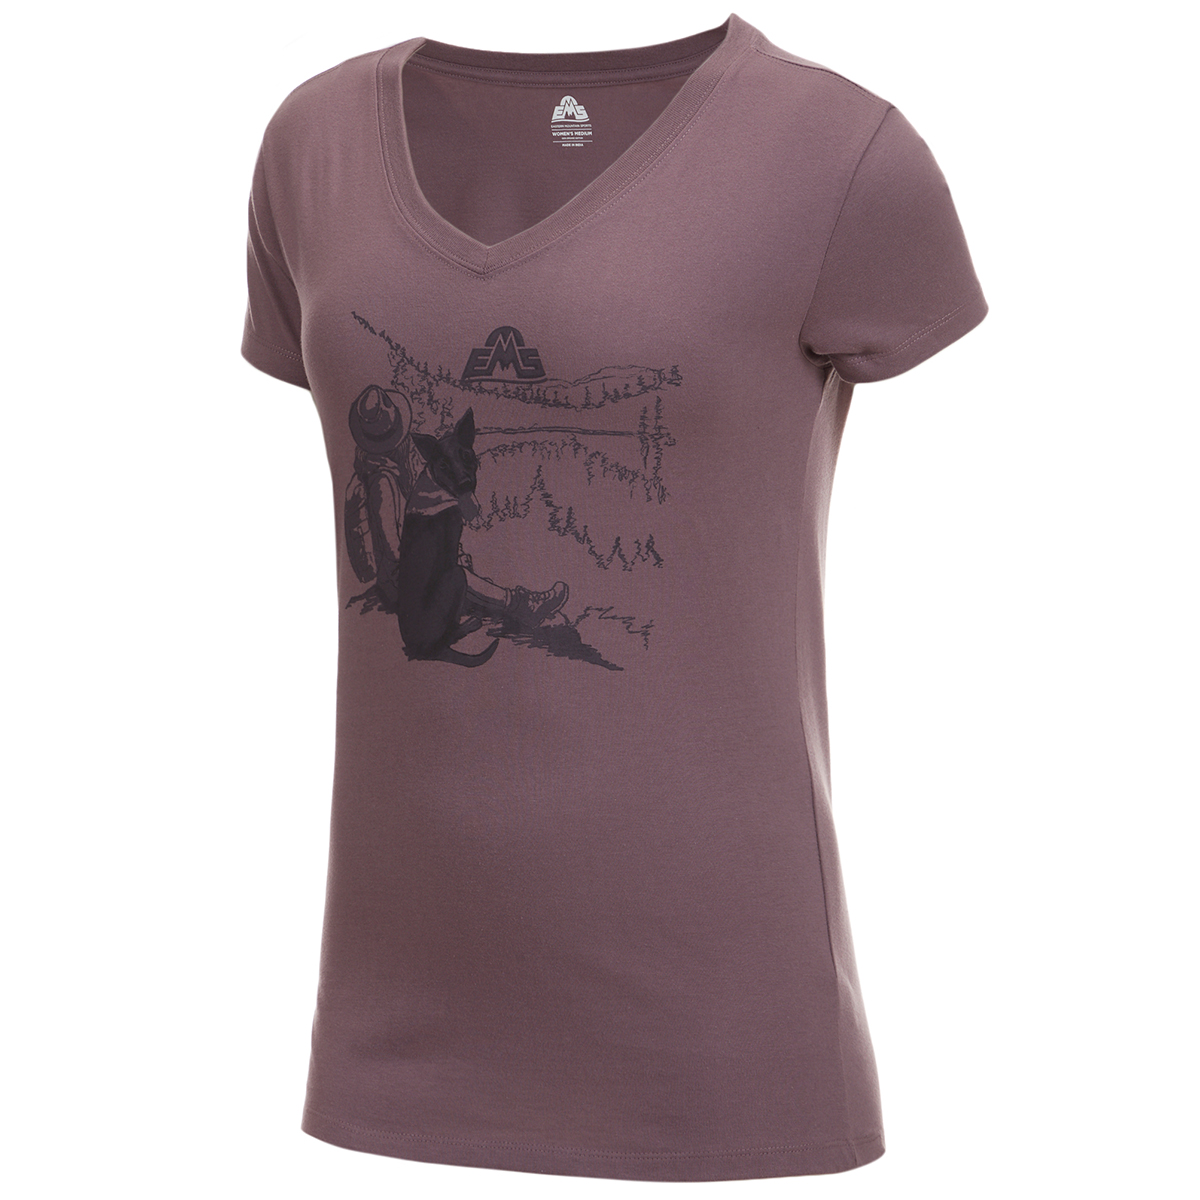 Ems Women's Girl With A View Short-Sleeve Graphic Tee